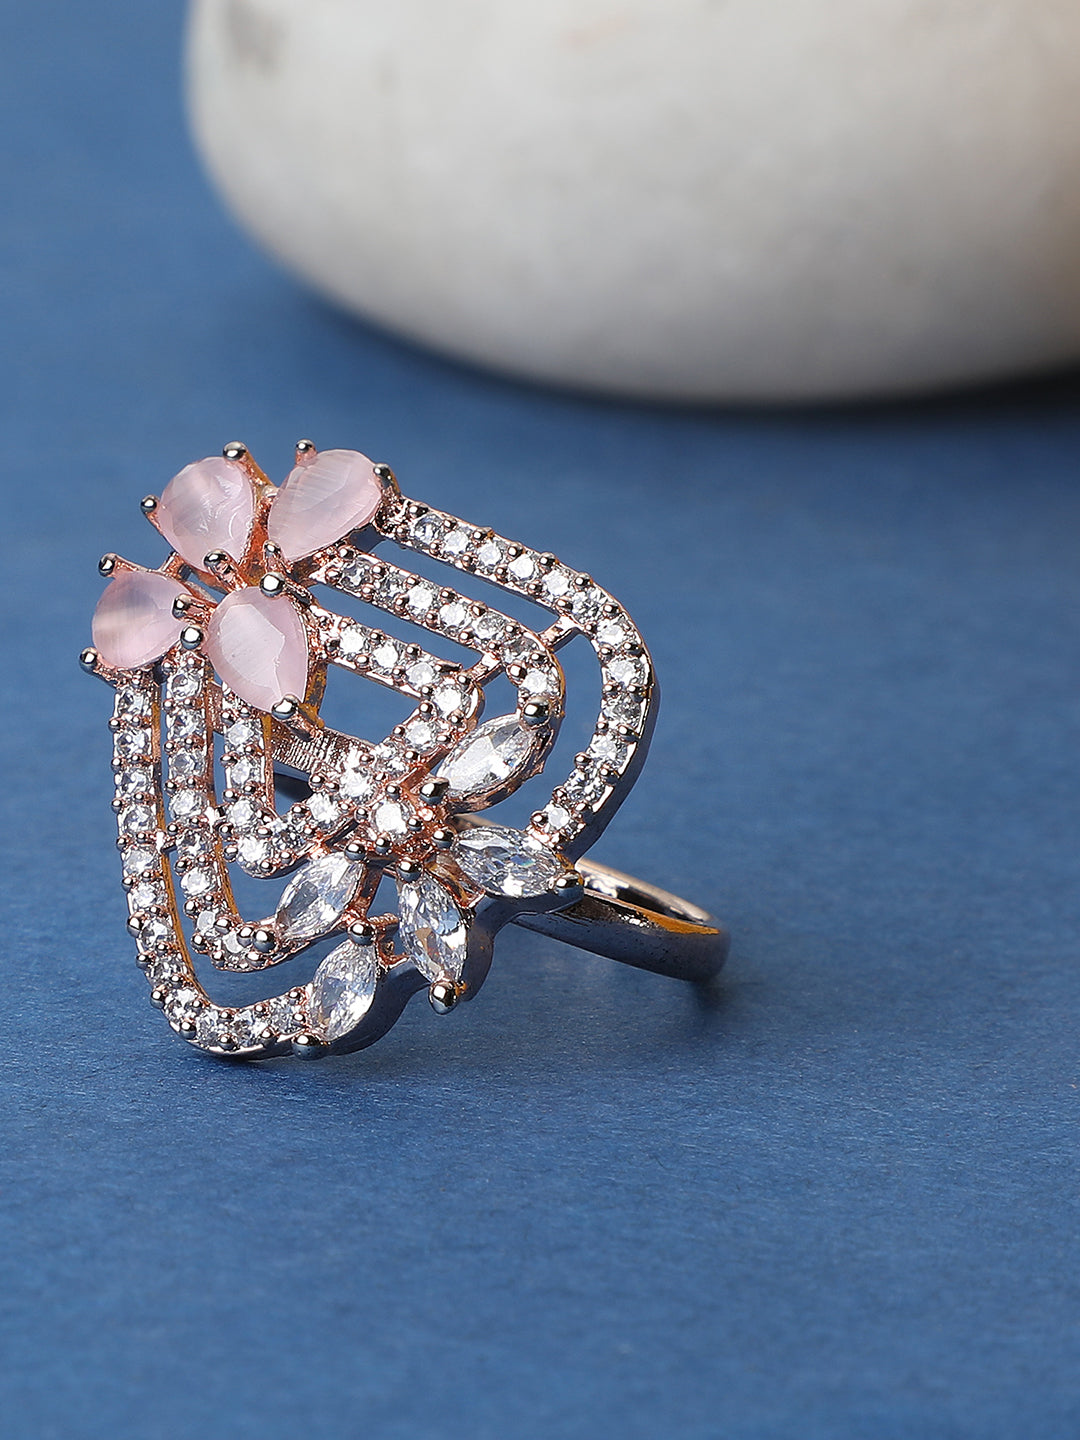 Women's Gold-Plated Pink & White Ad-Studded Adjustable Finger Ring - Anikas Creation